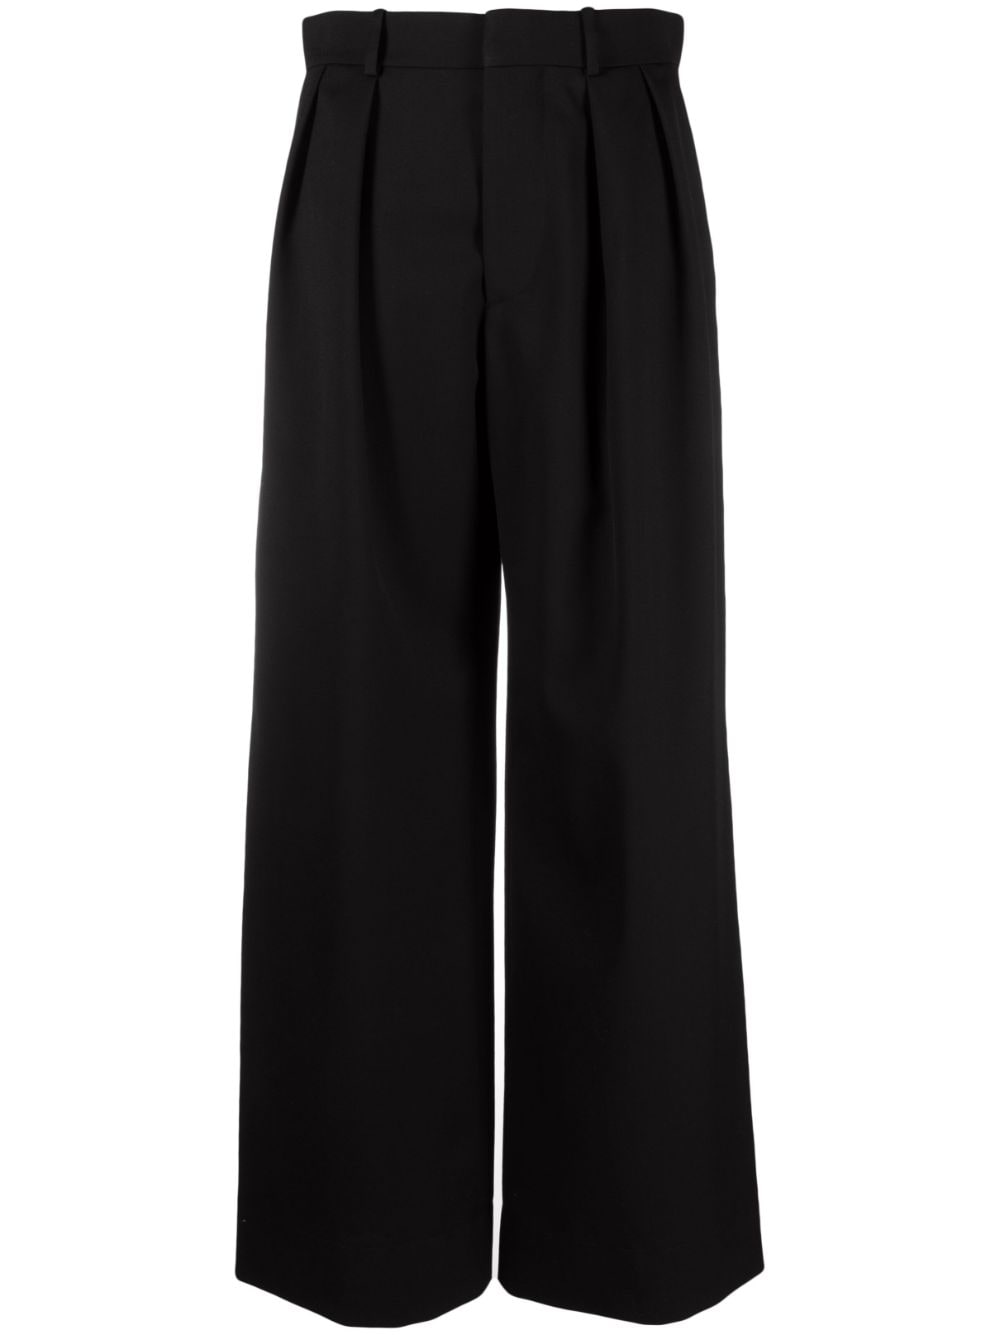 Wardrobe.nyc Low Rise Plated Trouser In Black